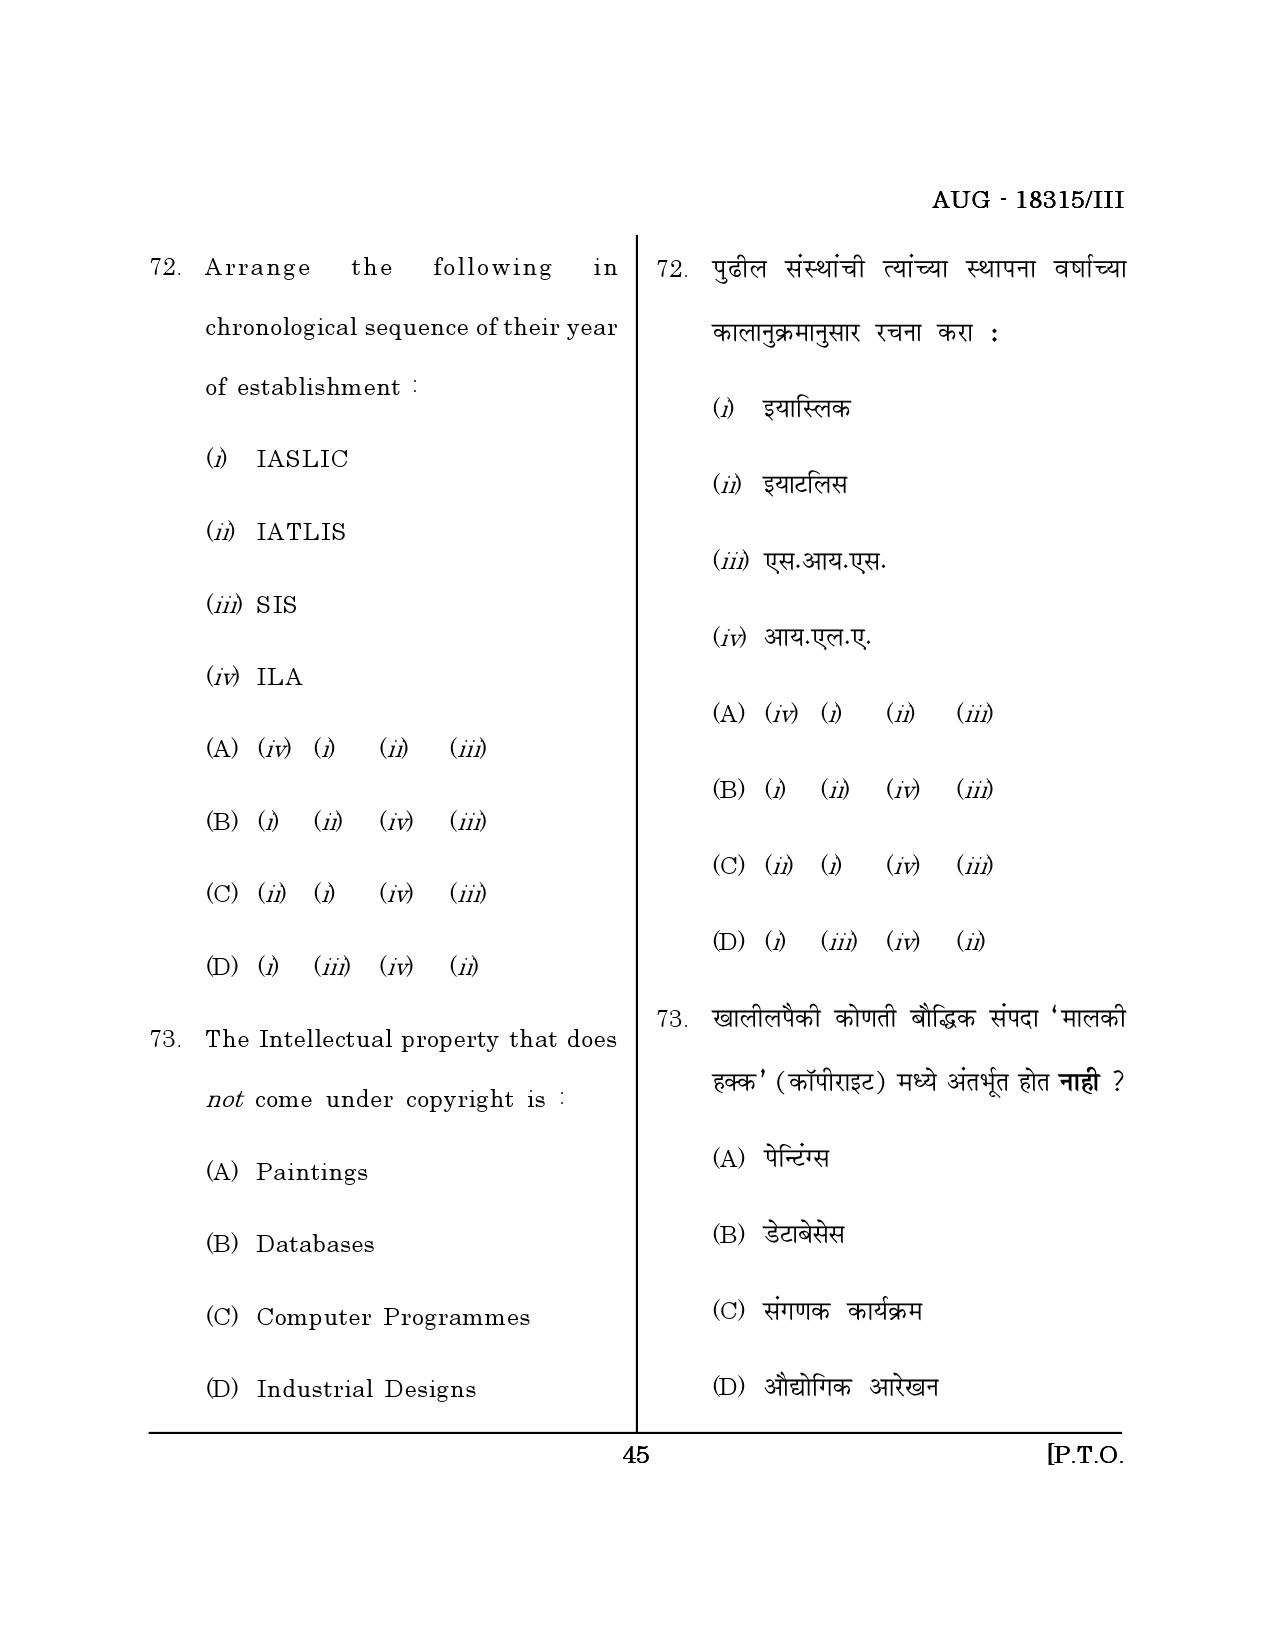 Maharashtra SET Library Information Science Question Paper III August 2015 44